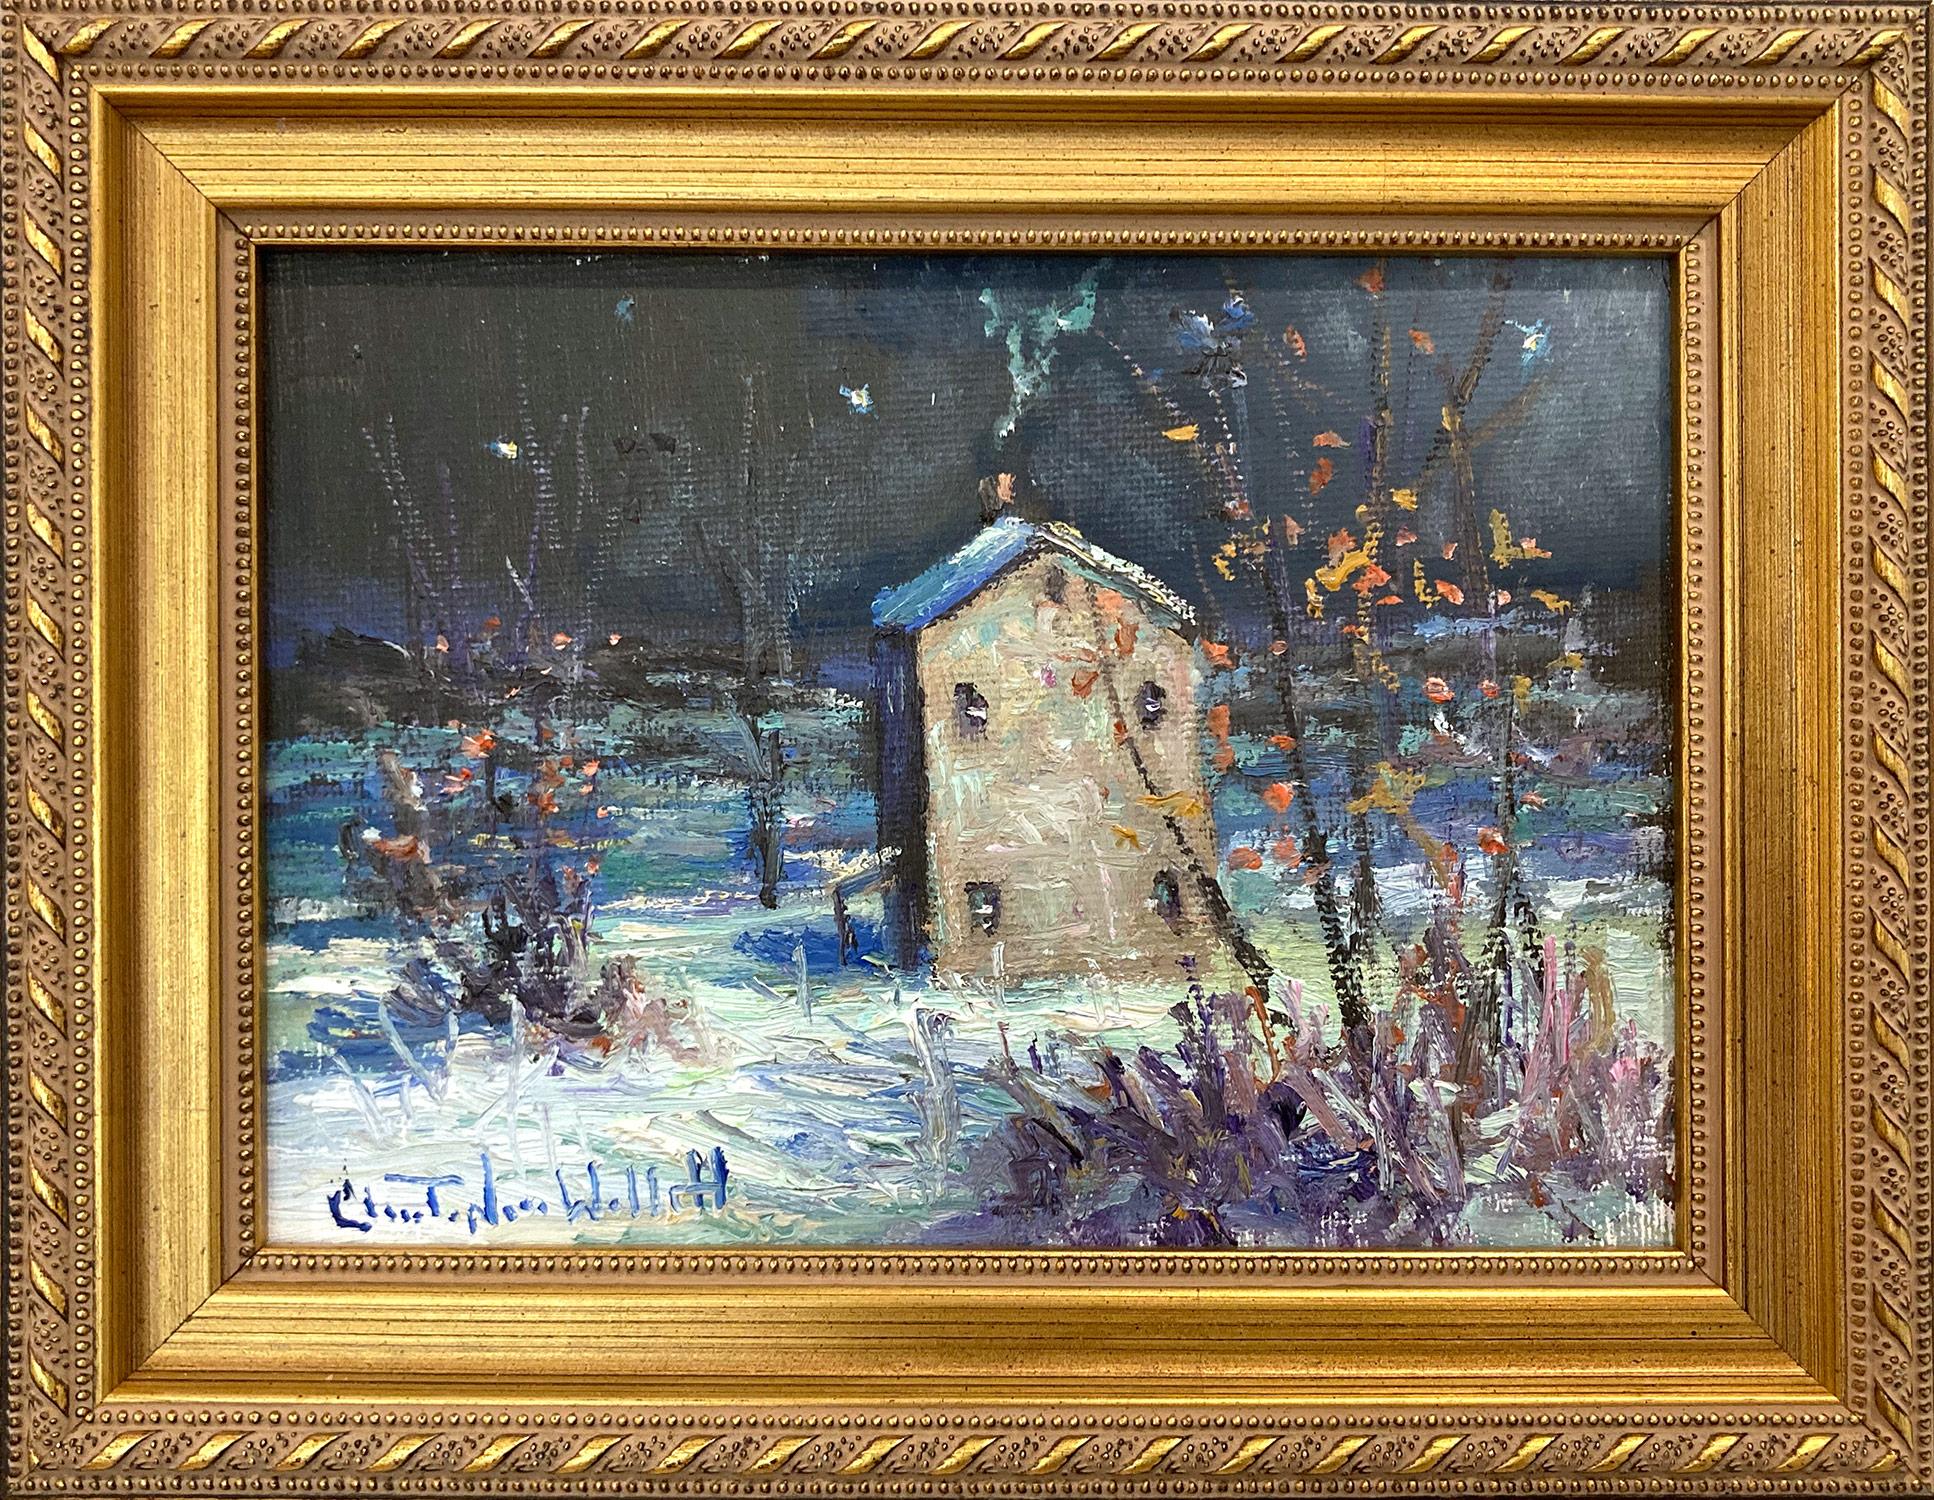 Christopher Willett Landscape Painting - "New Years Night" Plumstead Bucks County Snow Scene Landscape Oil Painting